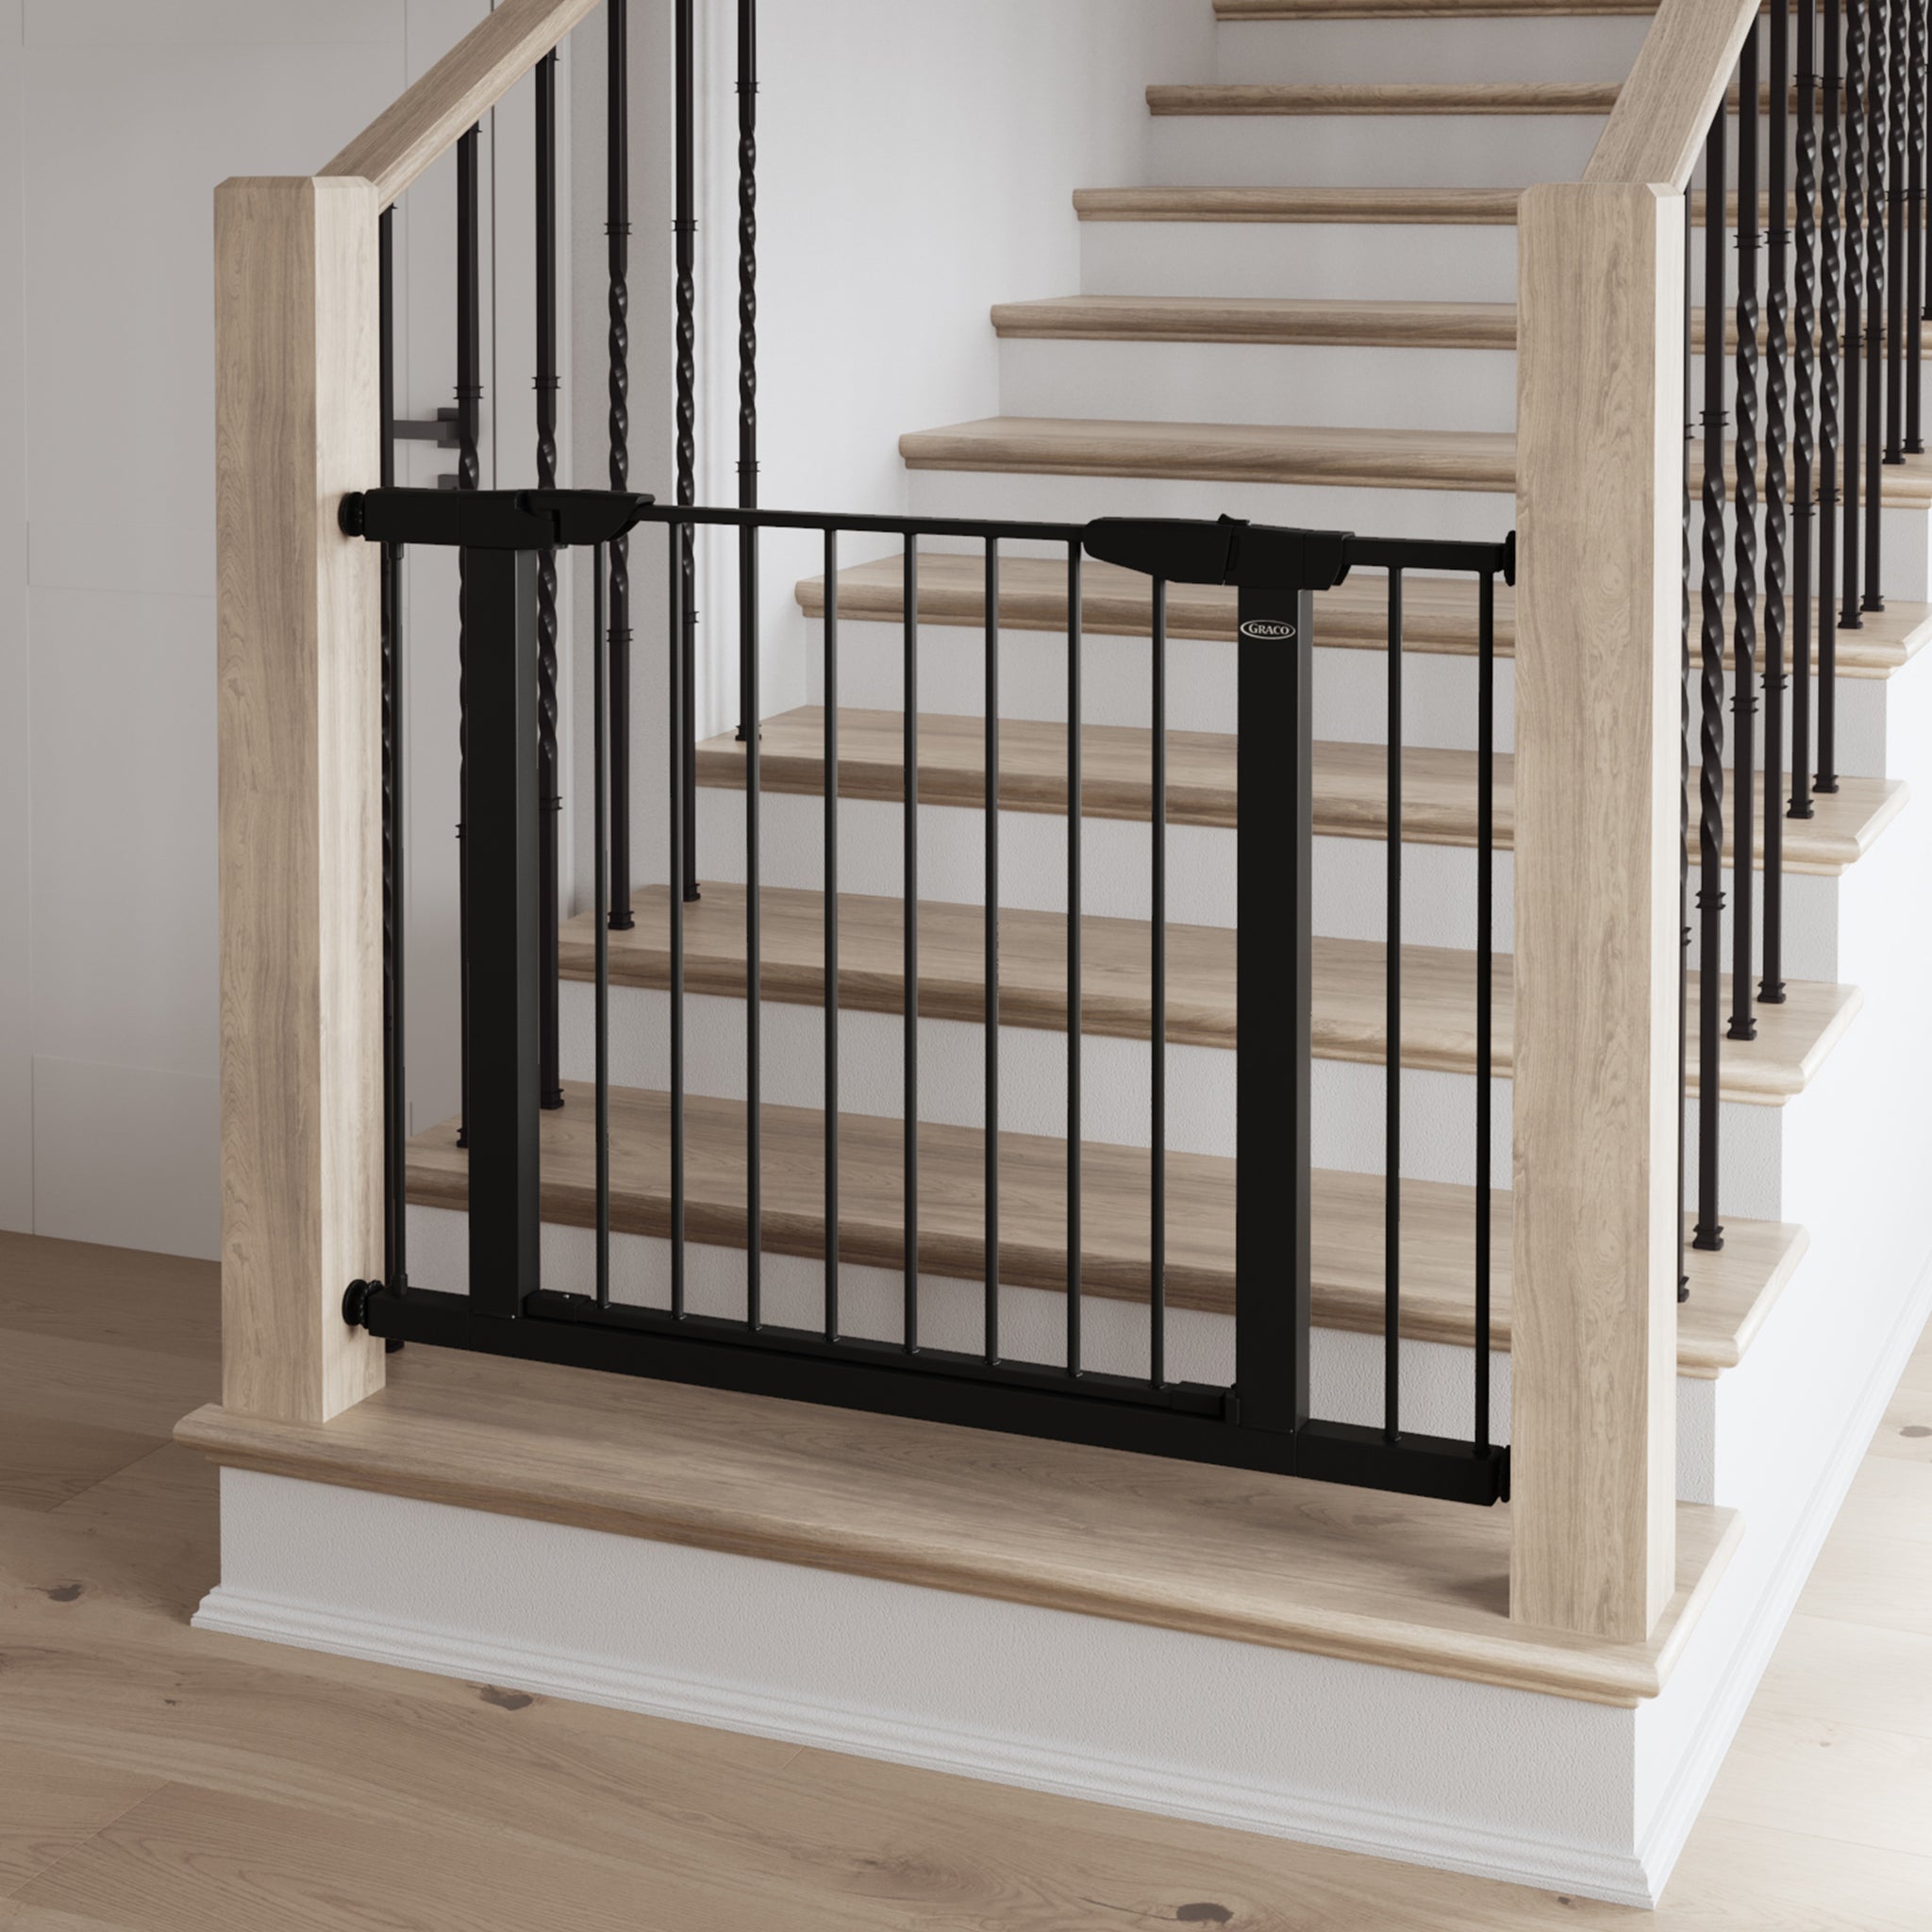 black safety gate installed in stairs